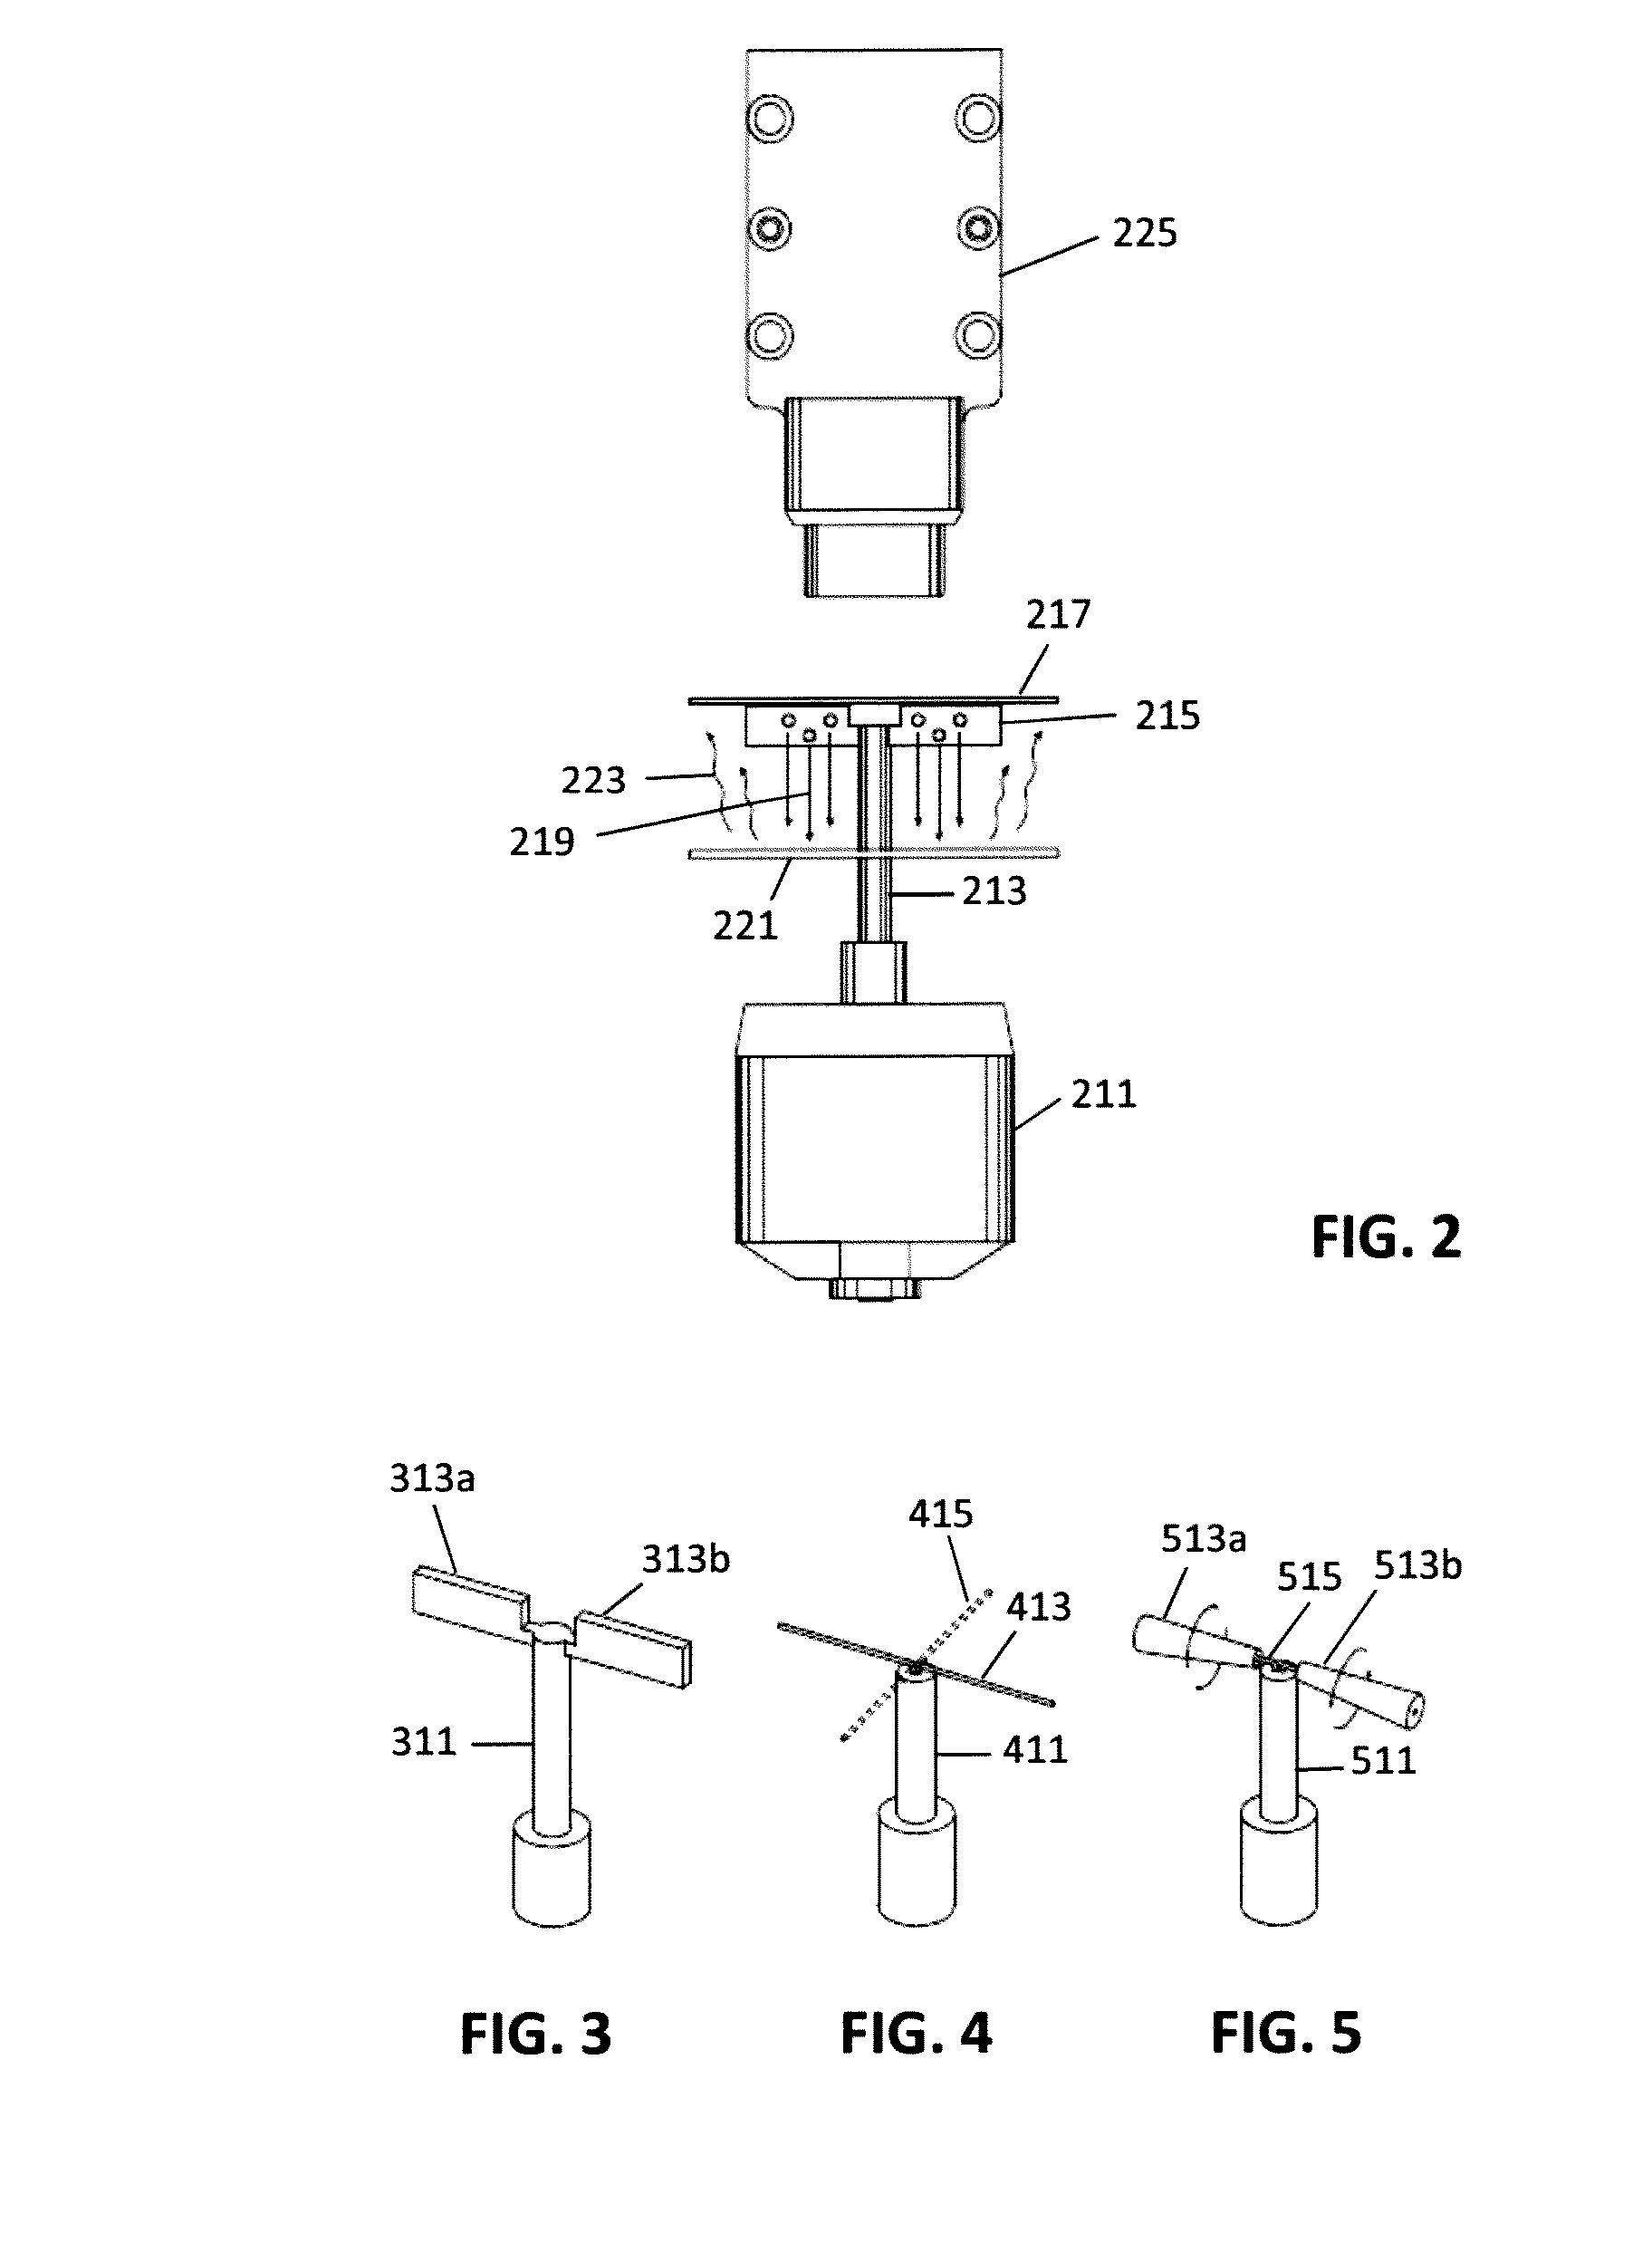 Electron excited x-ray fluorescence device